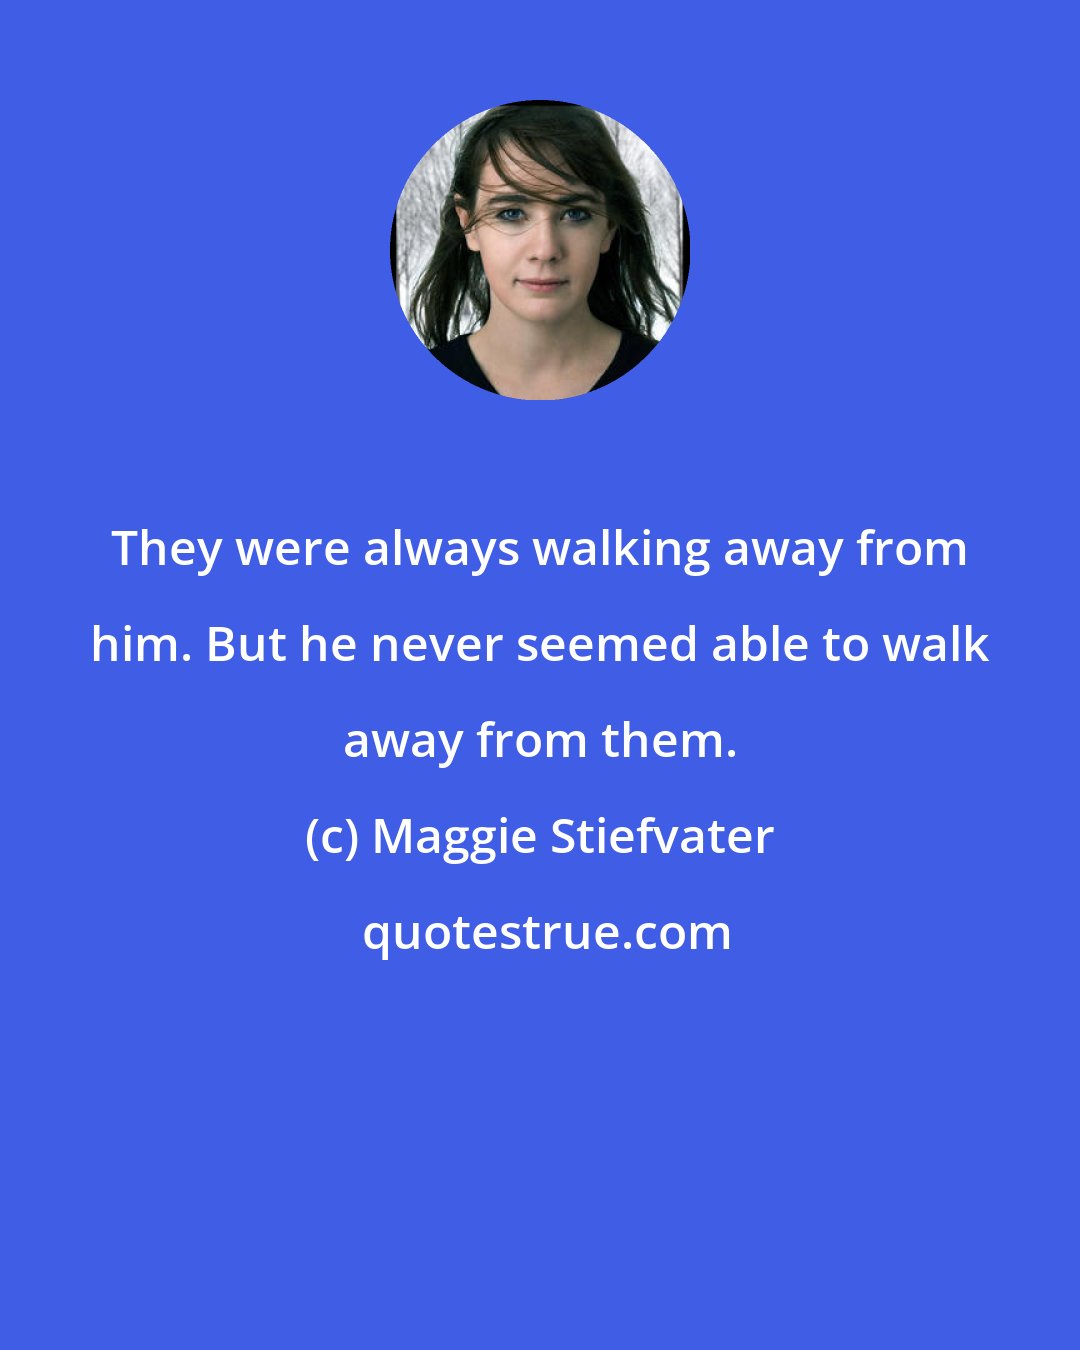 Maggie Stiefvater: They were always walking away from him. But he never seemed able to walk away from them.